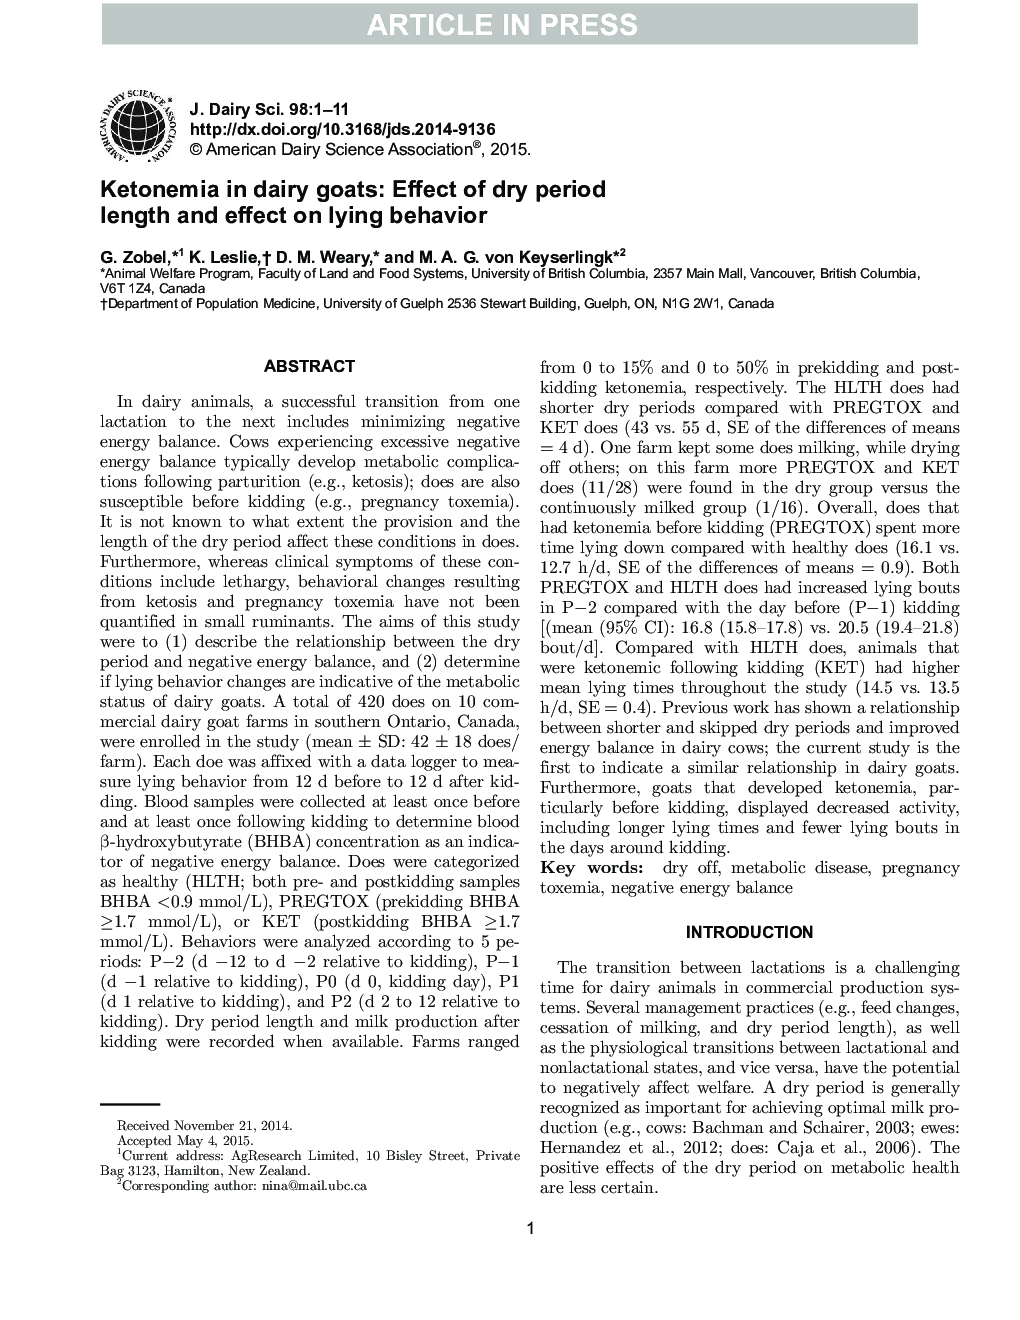 Ketonemia in dairy goats: Effect of dry period length and effect on lying behavior